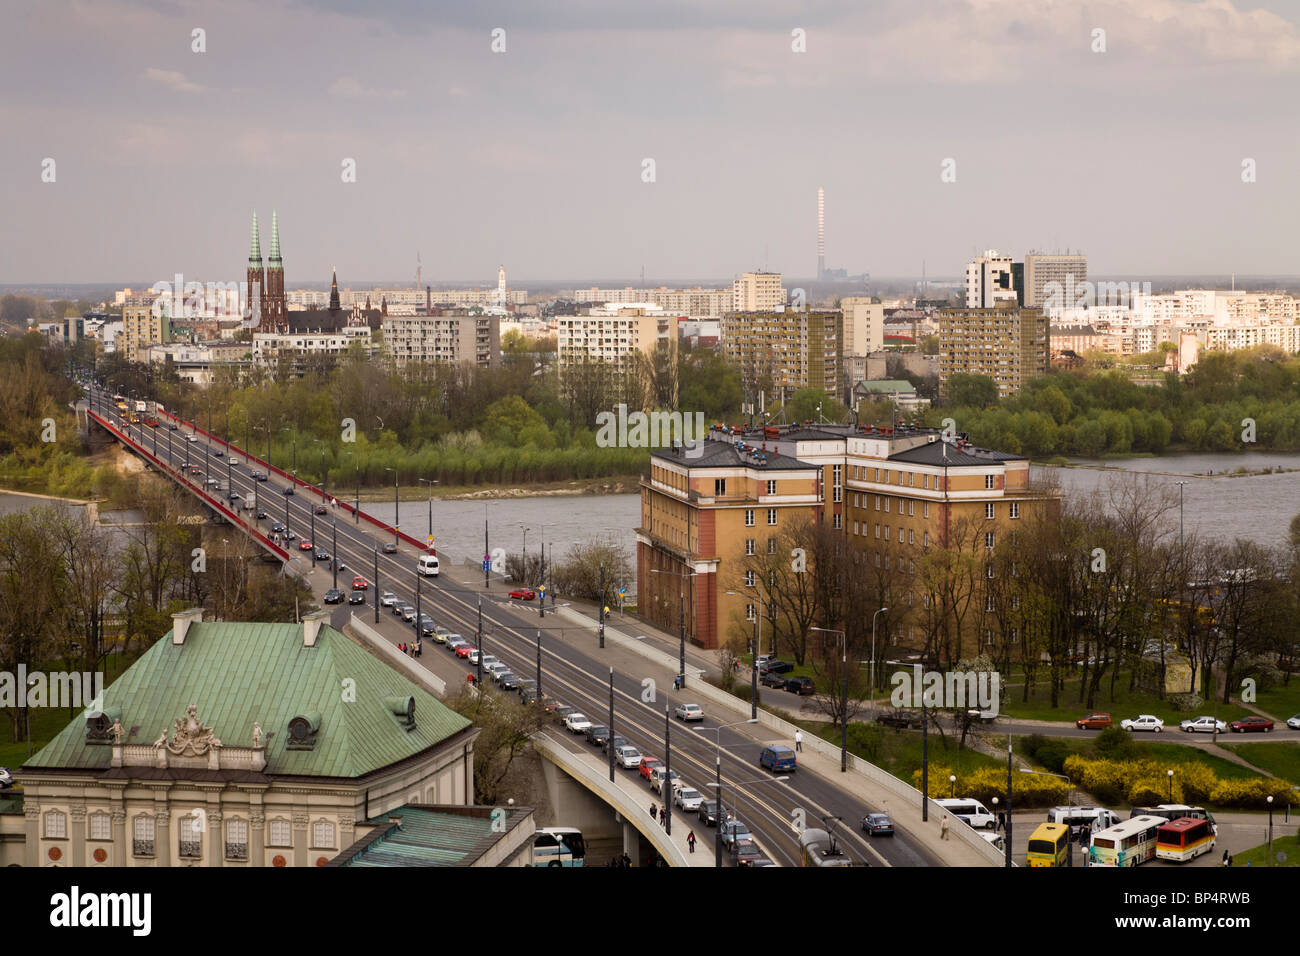 Cars on Solidarity Avenue (Aleja Solidarnosci), one of the main thoroughfares in Warsaw Poland. Stock Photo